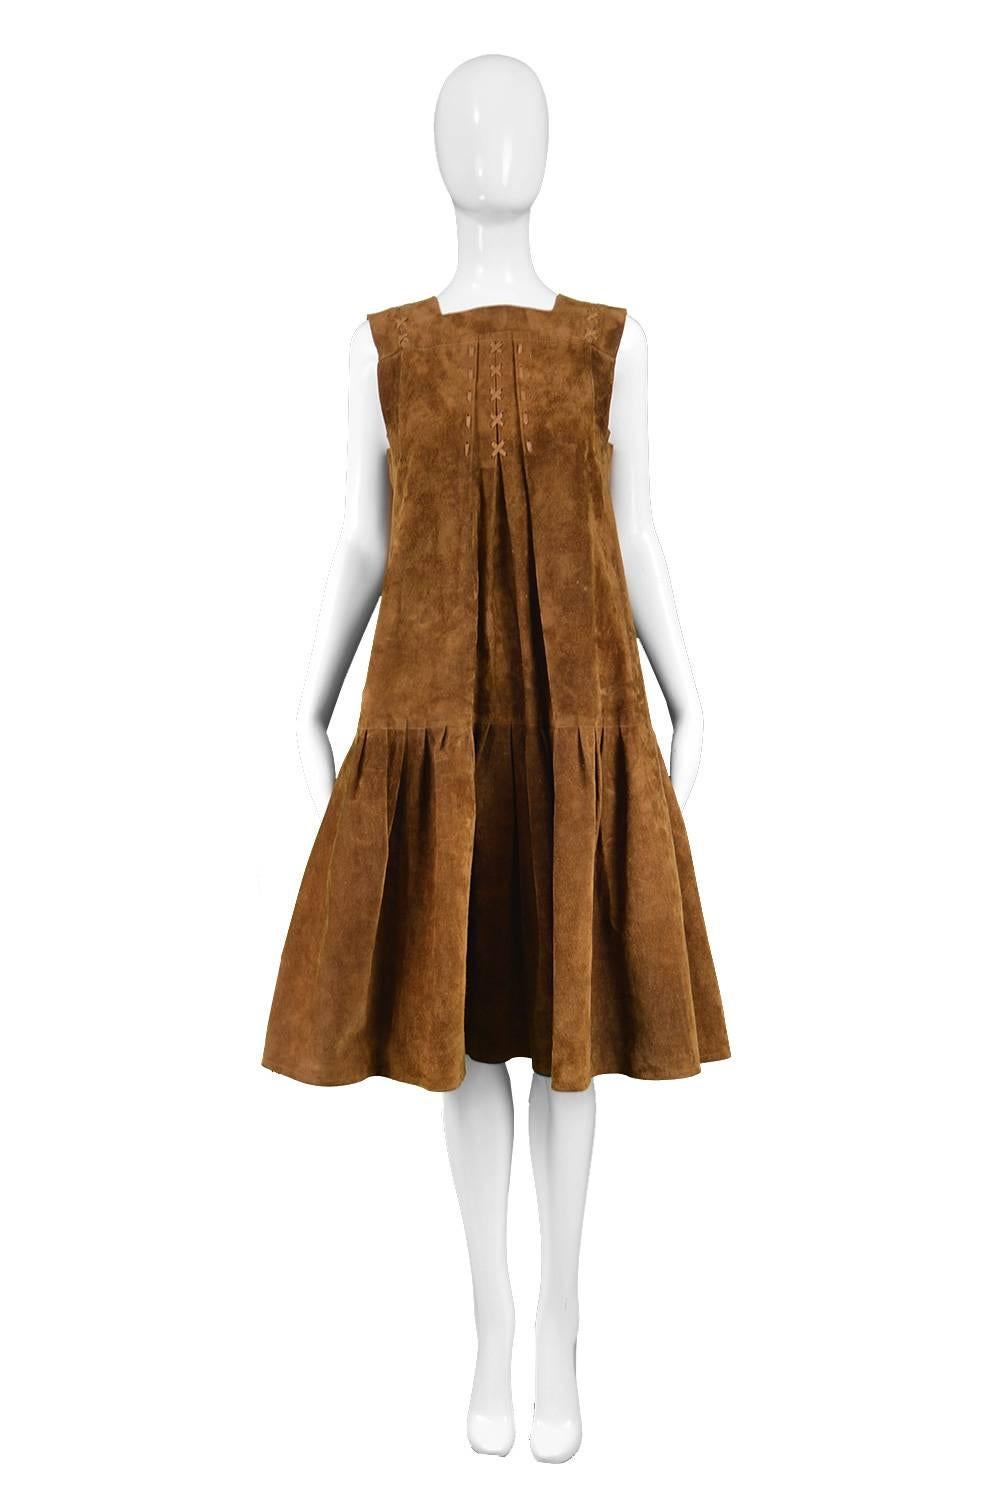 Jean Muir Brown Suede Vintage Sleeveless Pinafore Dress / Jacket, 1970s

Estimated Size: UK 10/ US 6/ EU 38 but would also suit a taller UK 8/ US 4 with a slightly looser fit. Please check measurements. 
Bust - 36” / 91cm (allow a couple of inches